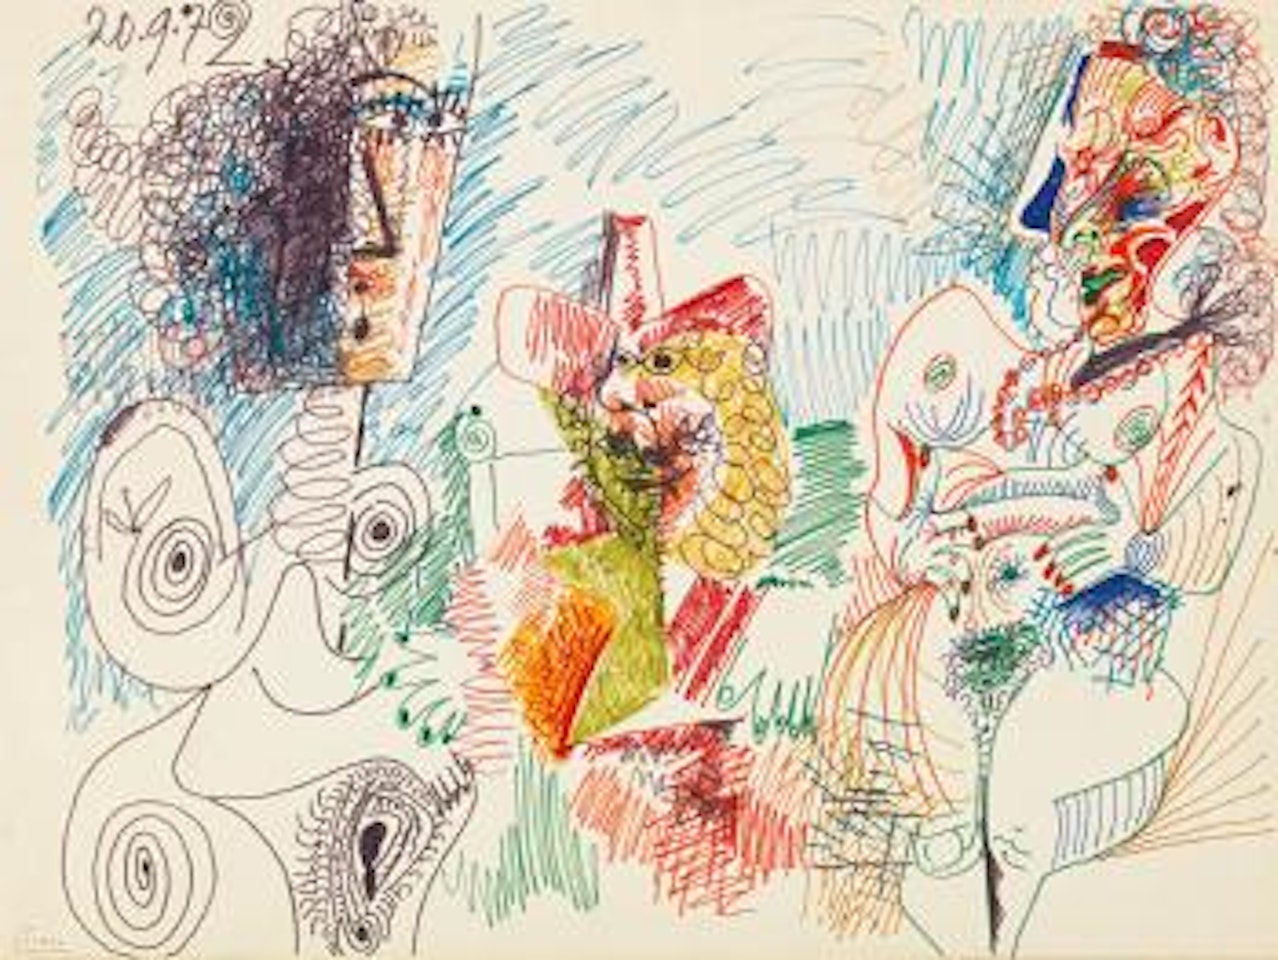 Trois Personnages (Recto) & Cinq Personnages (Verso): A Double-sided Drawing by Pablo Picasso